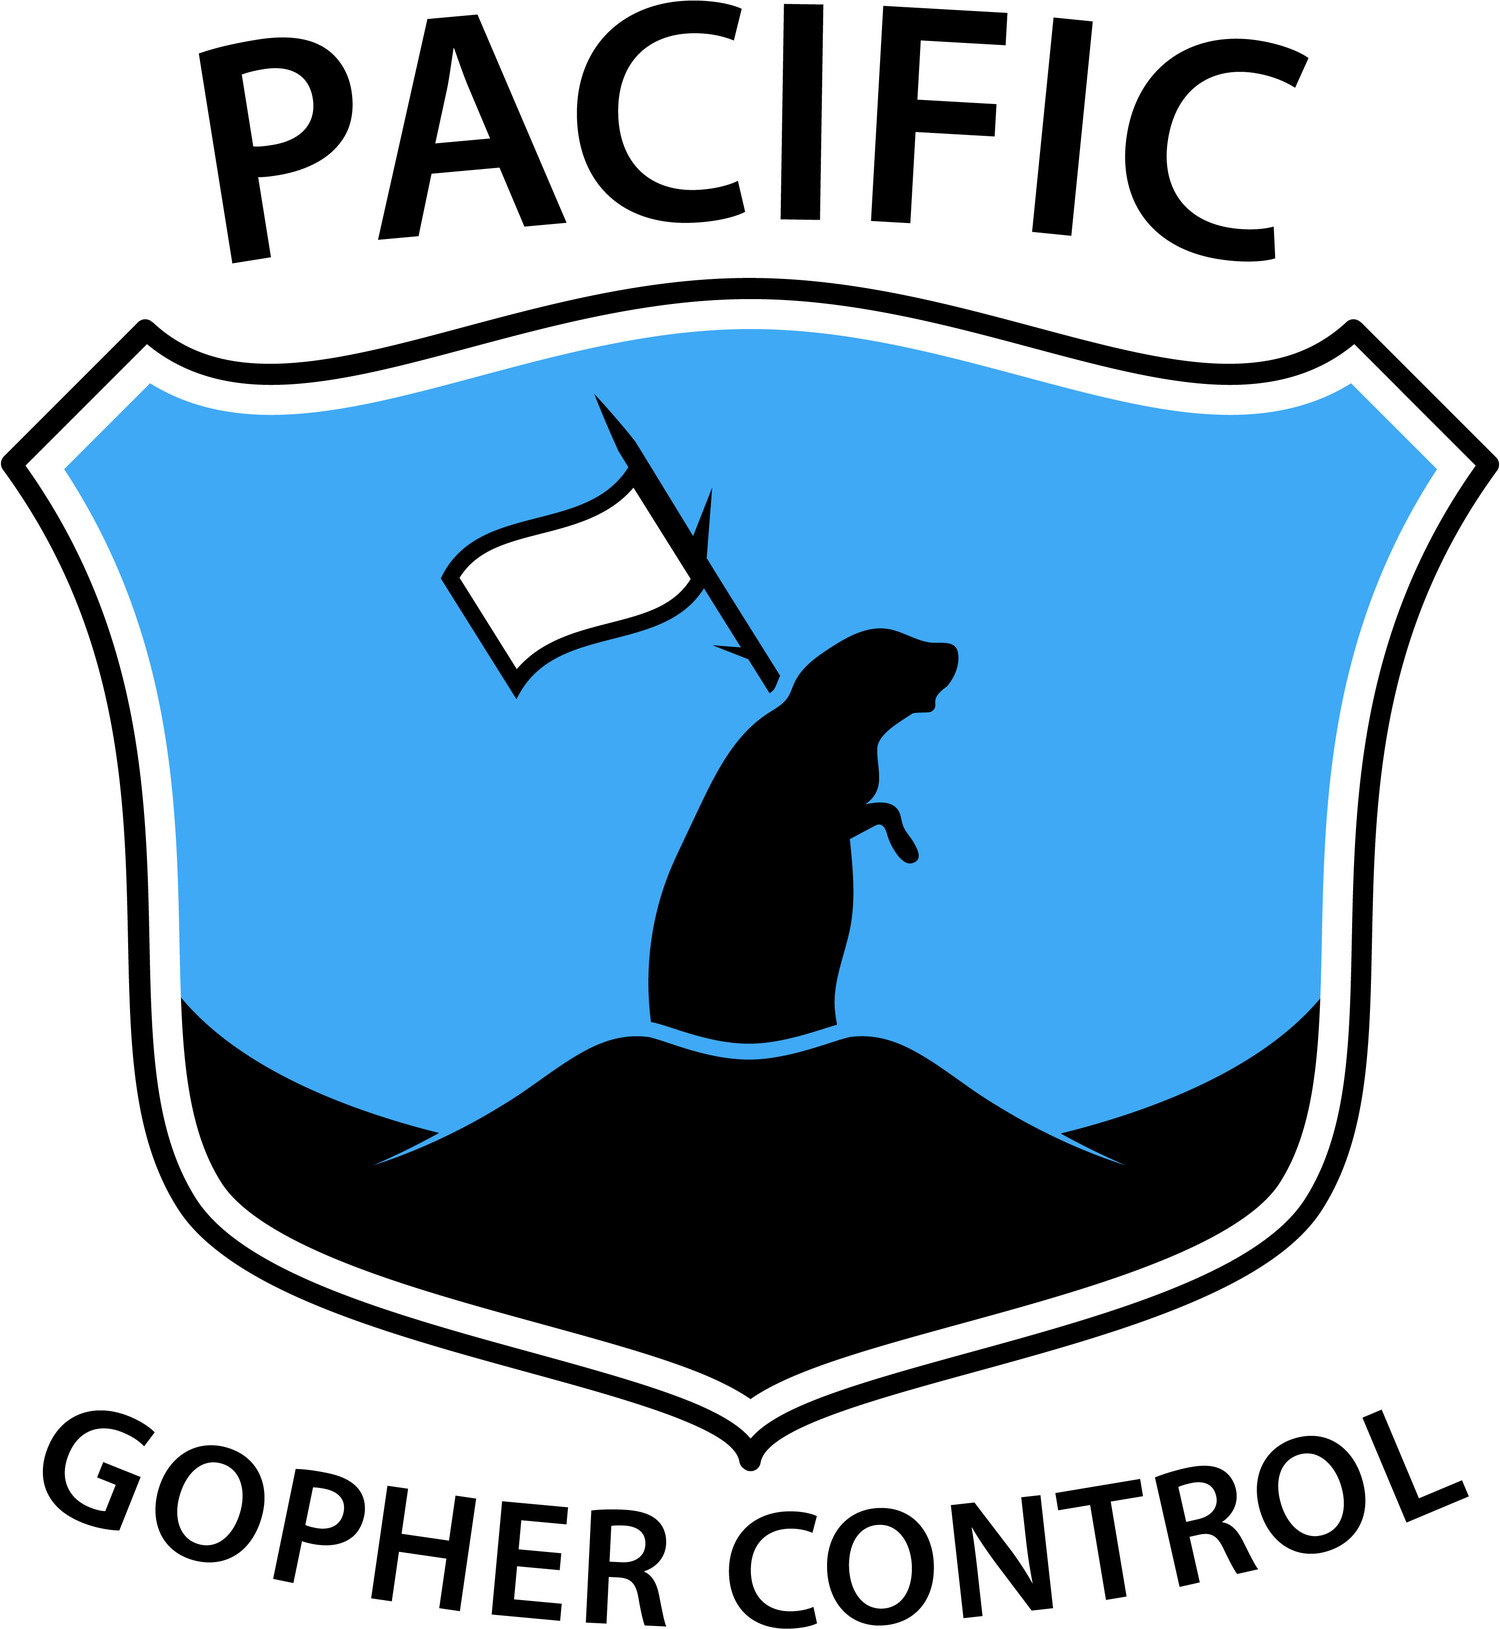 Pacific Gopher Control